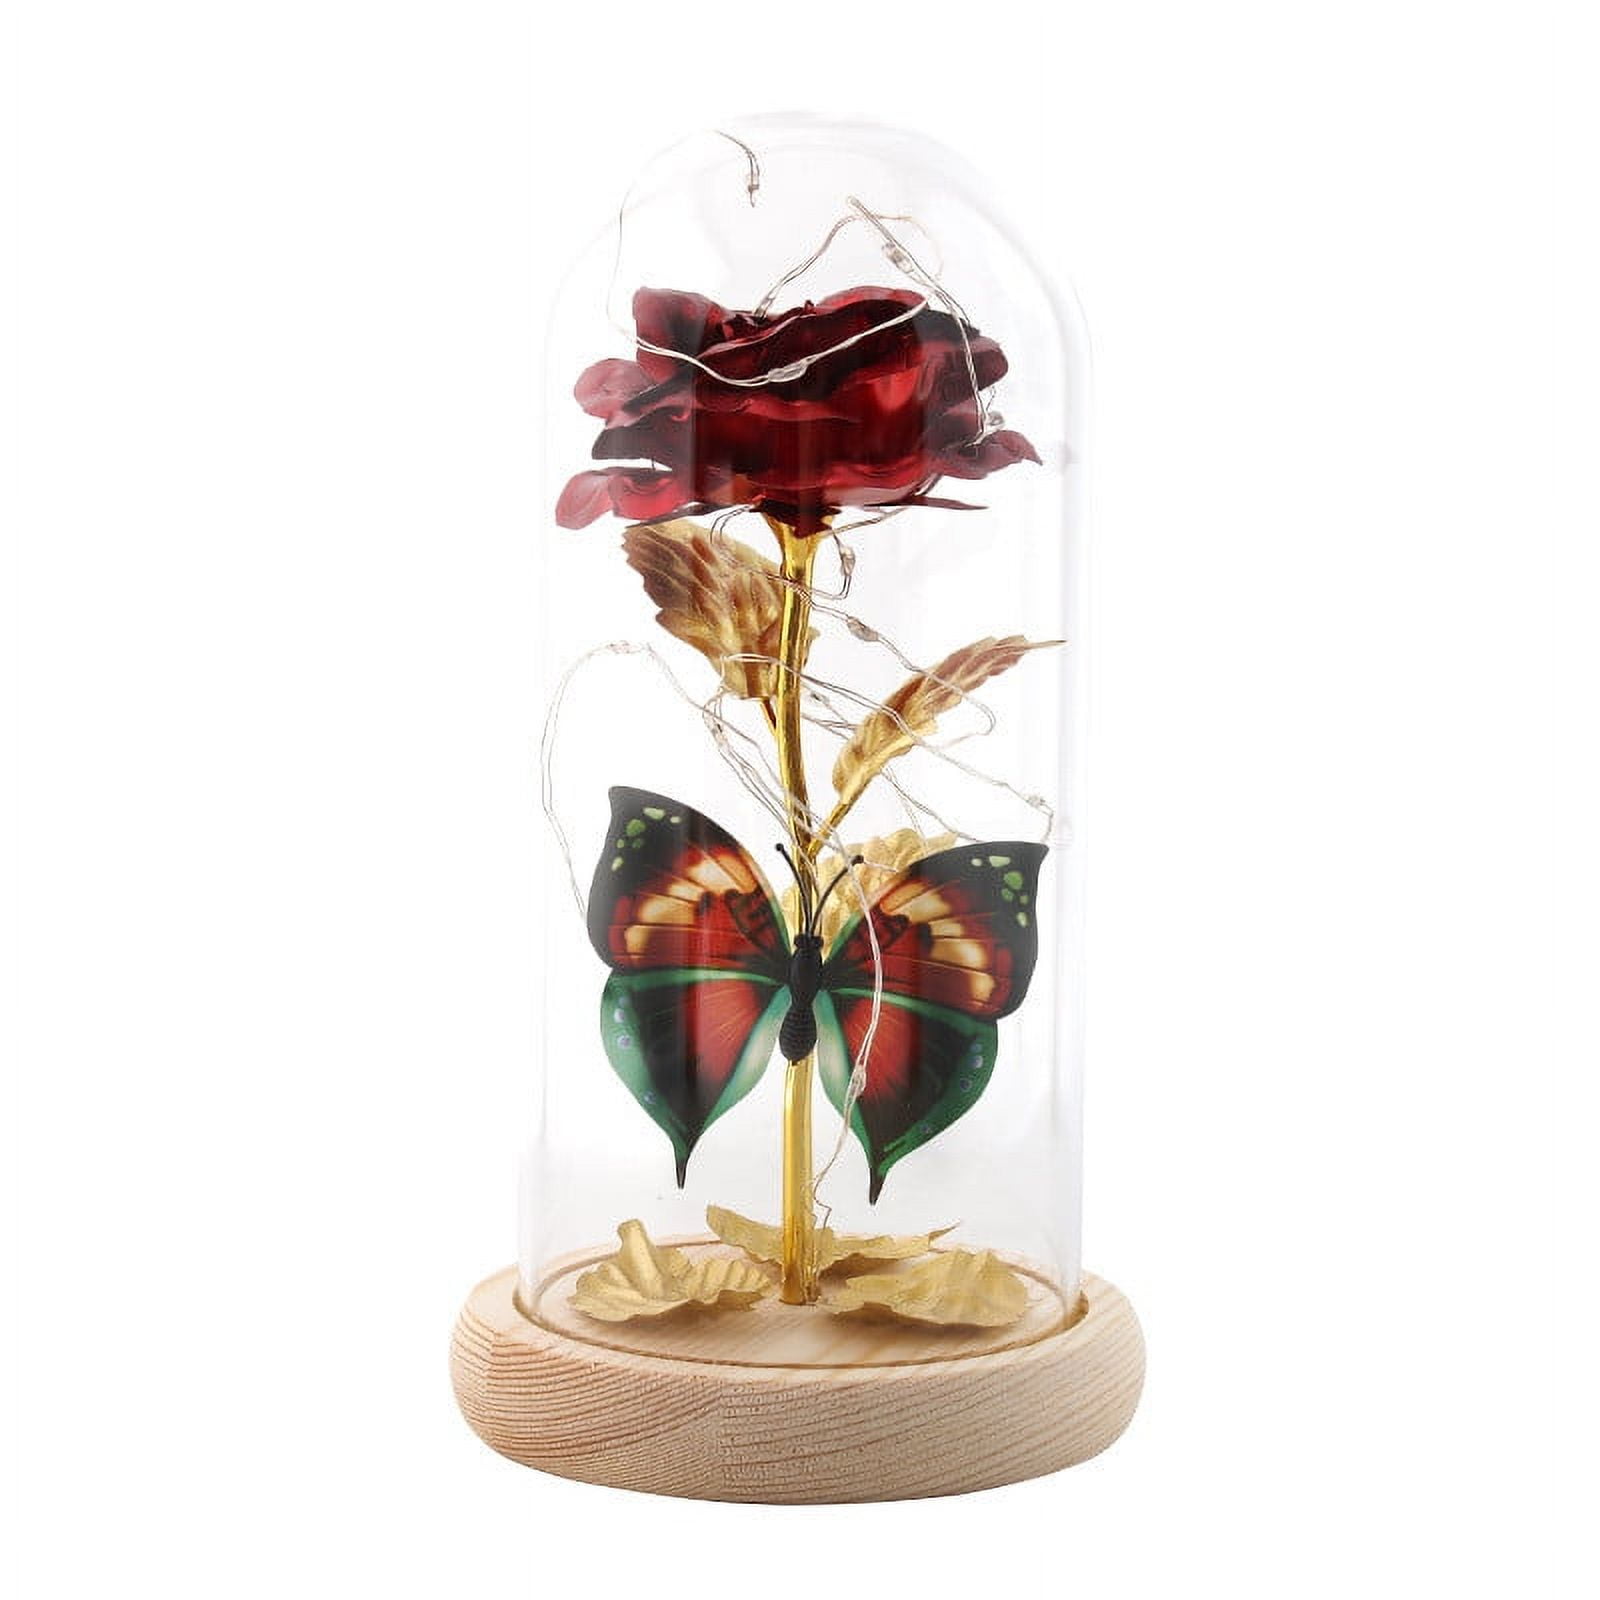  Tongtai Christmas Rose Flower Gifts for Women, Womens Gifts for  Christmas, Anniversary Birthday Wedding Gifts for Women Mom Mother,  Colorful Light Up Rose in Glass Dome : Home & Kitchen